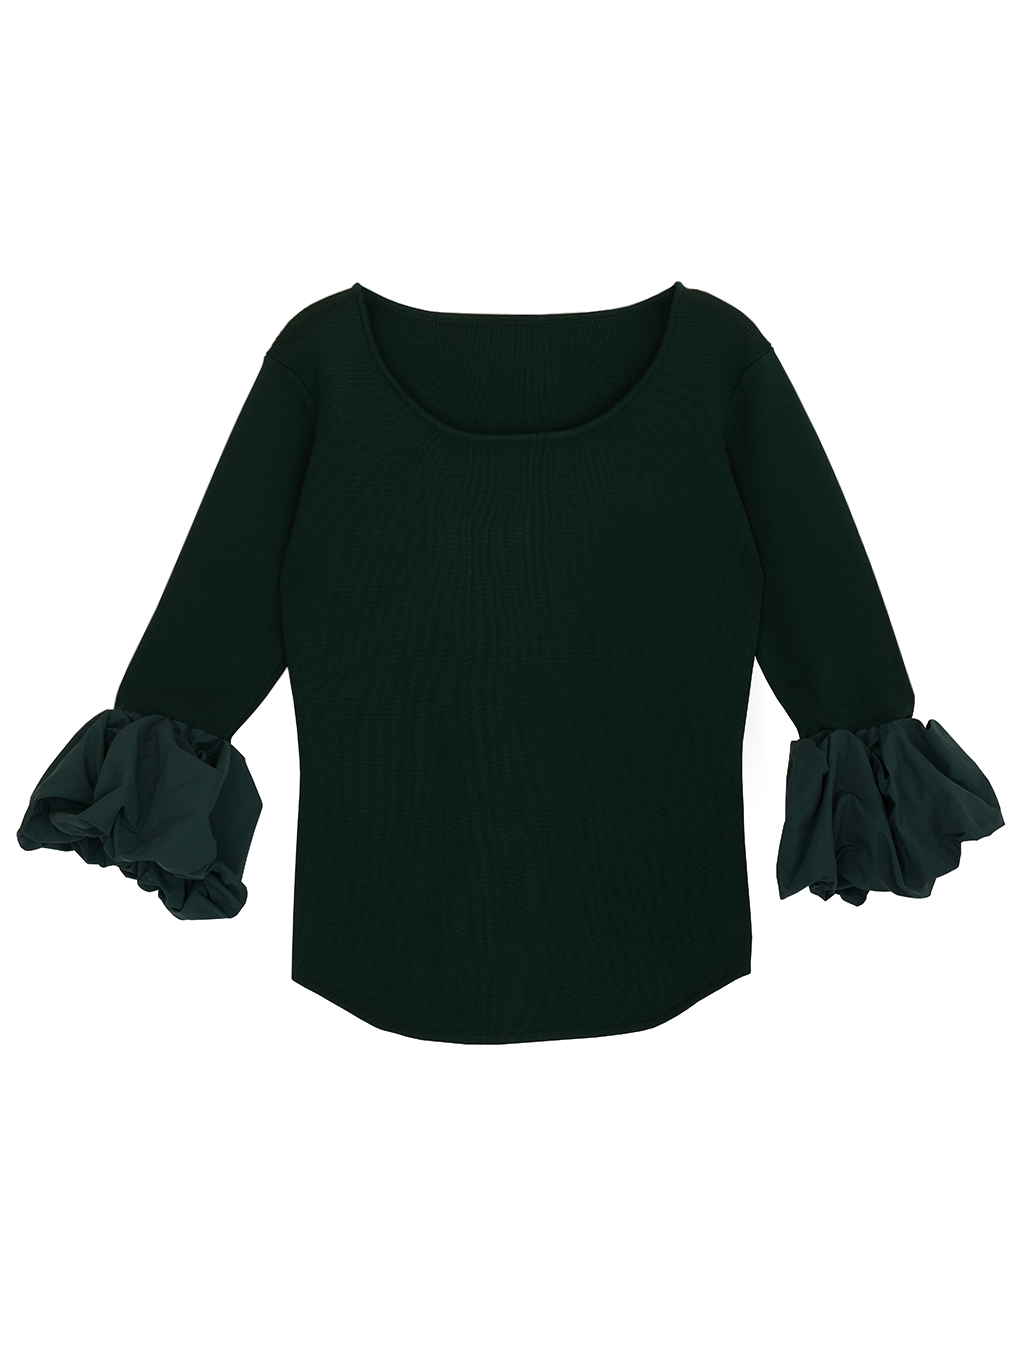 PINCH SLEEVE KNIT TOP